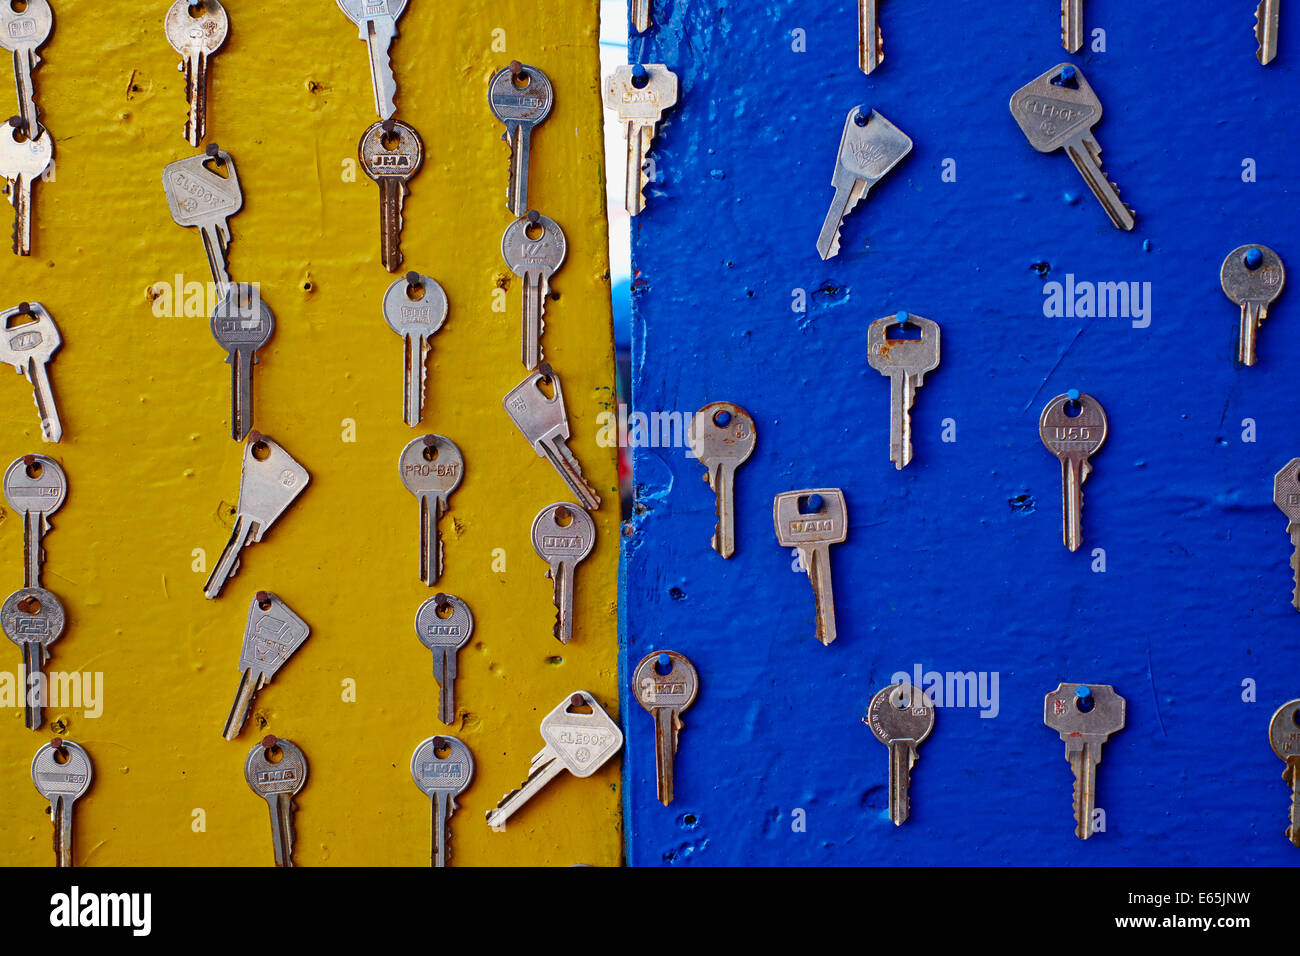 Photos Clef Images Clef Page 2 Alamy